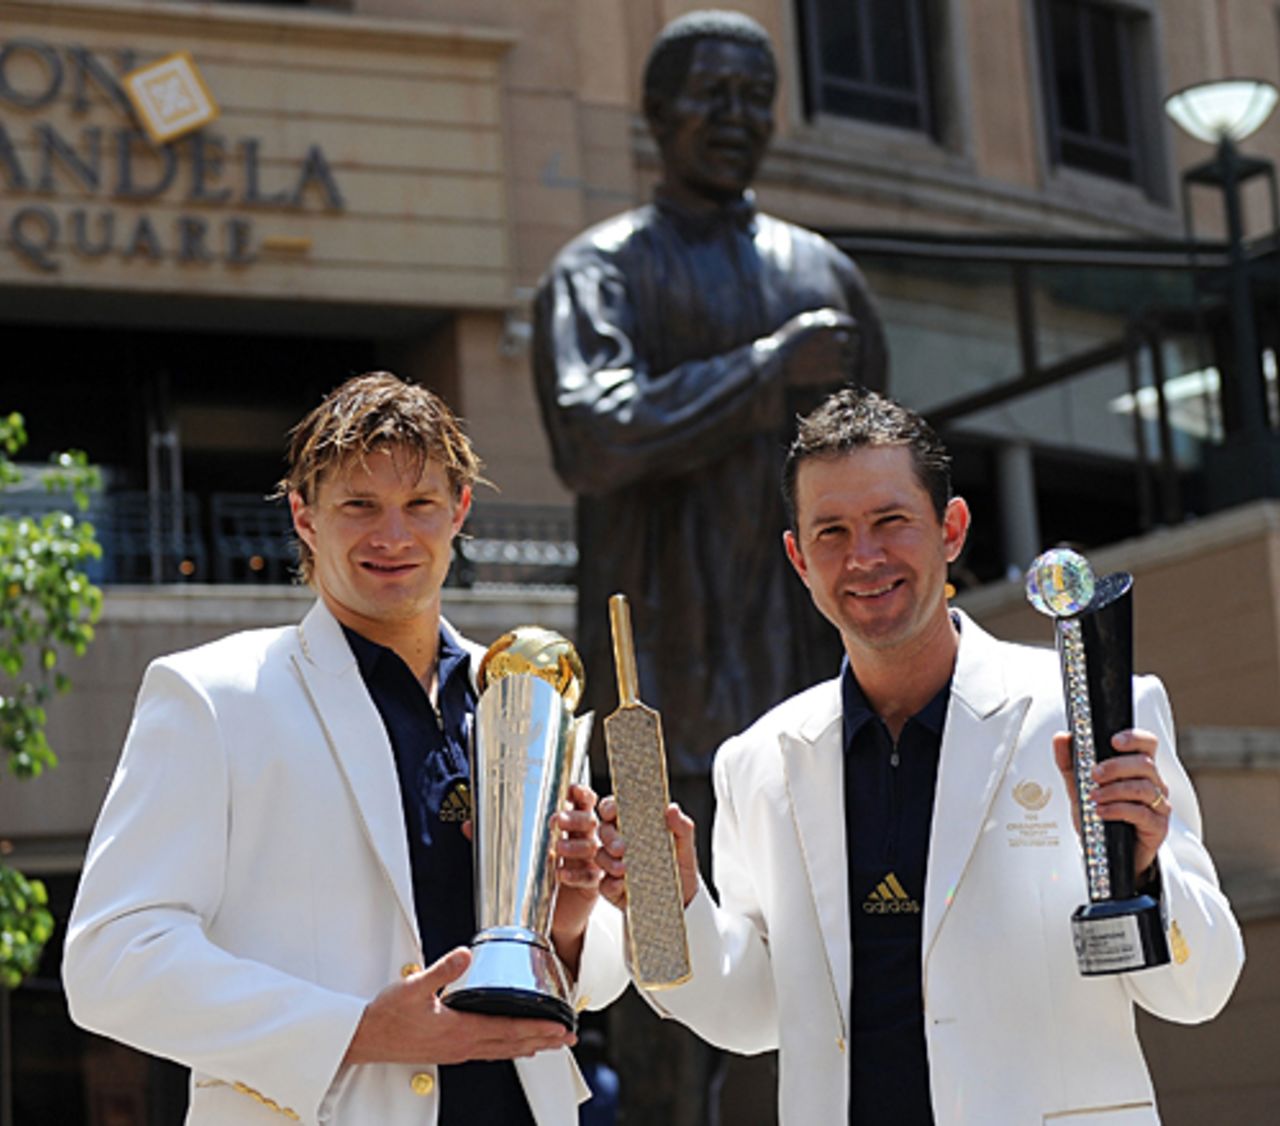 Ricky Ponting and Shane Watson with their prizes from the Champions Trophy, Johannesburg, October 6, 2009